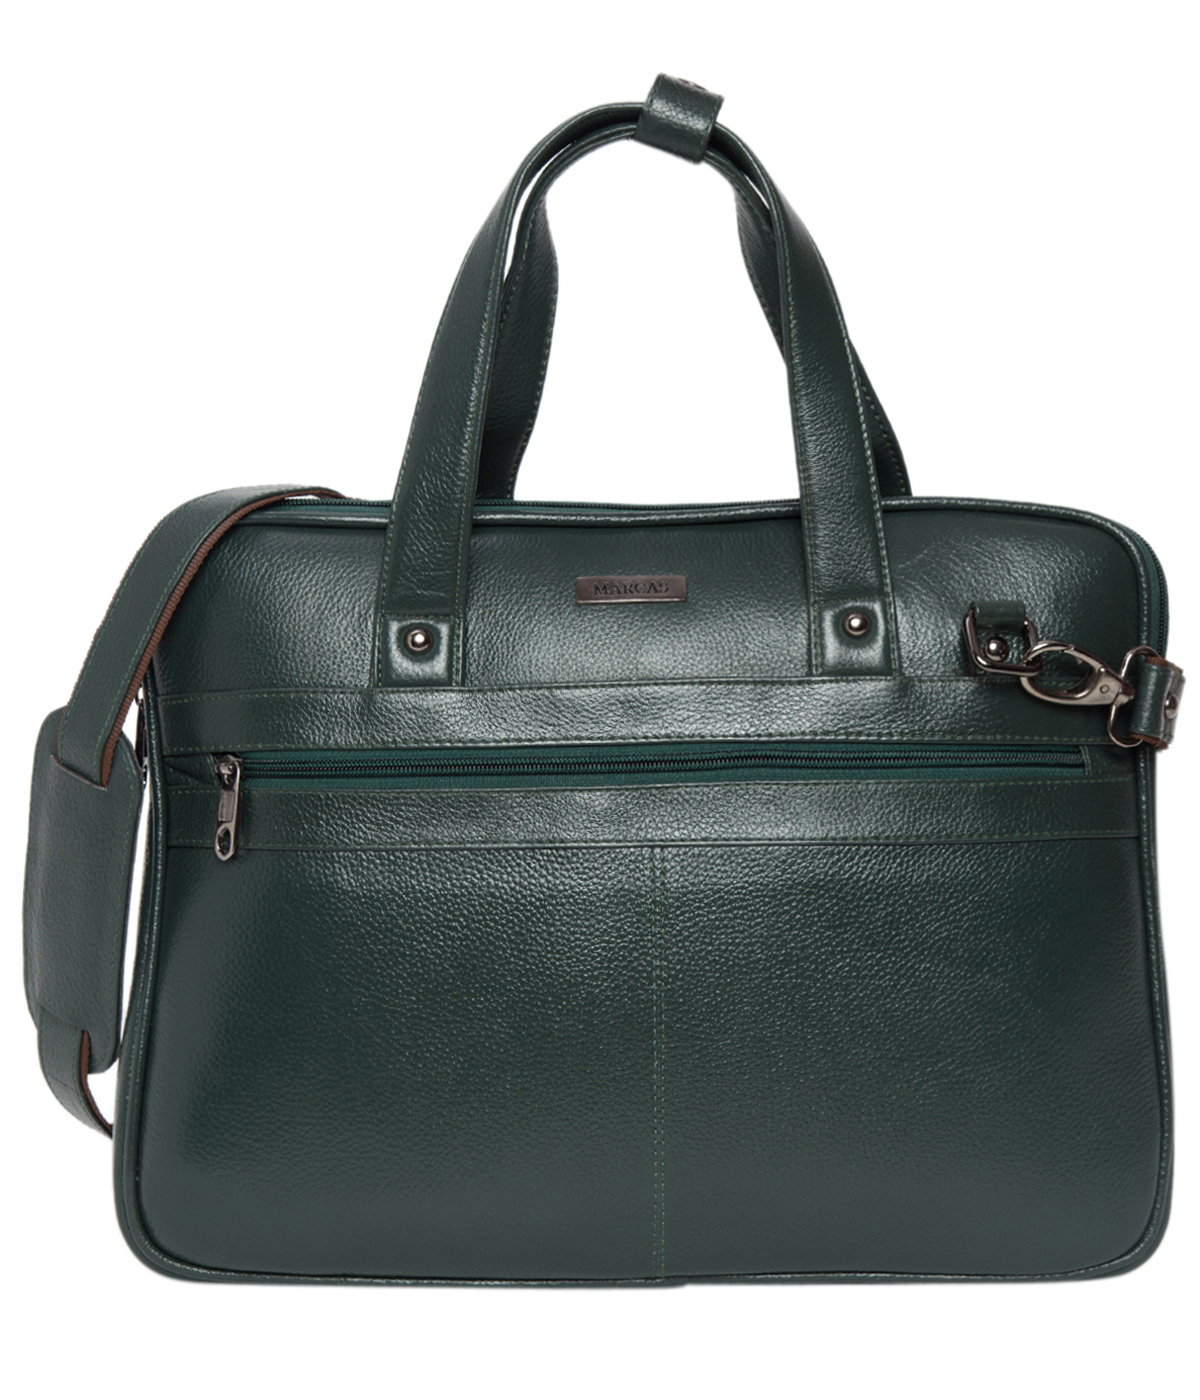 Marcas Amos Leather Laptop Bag Green